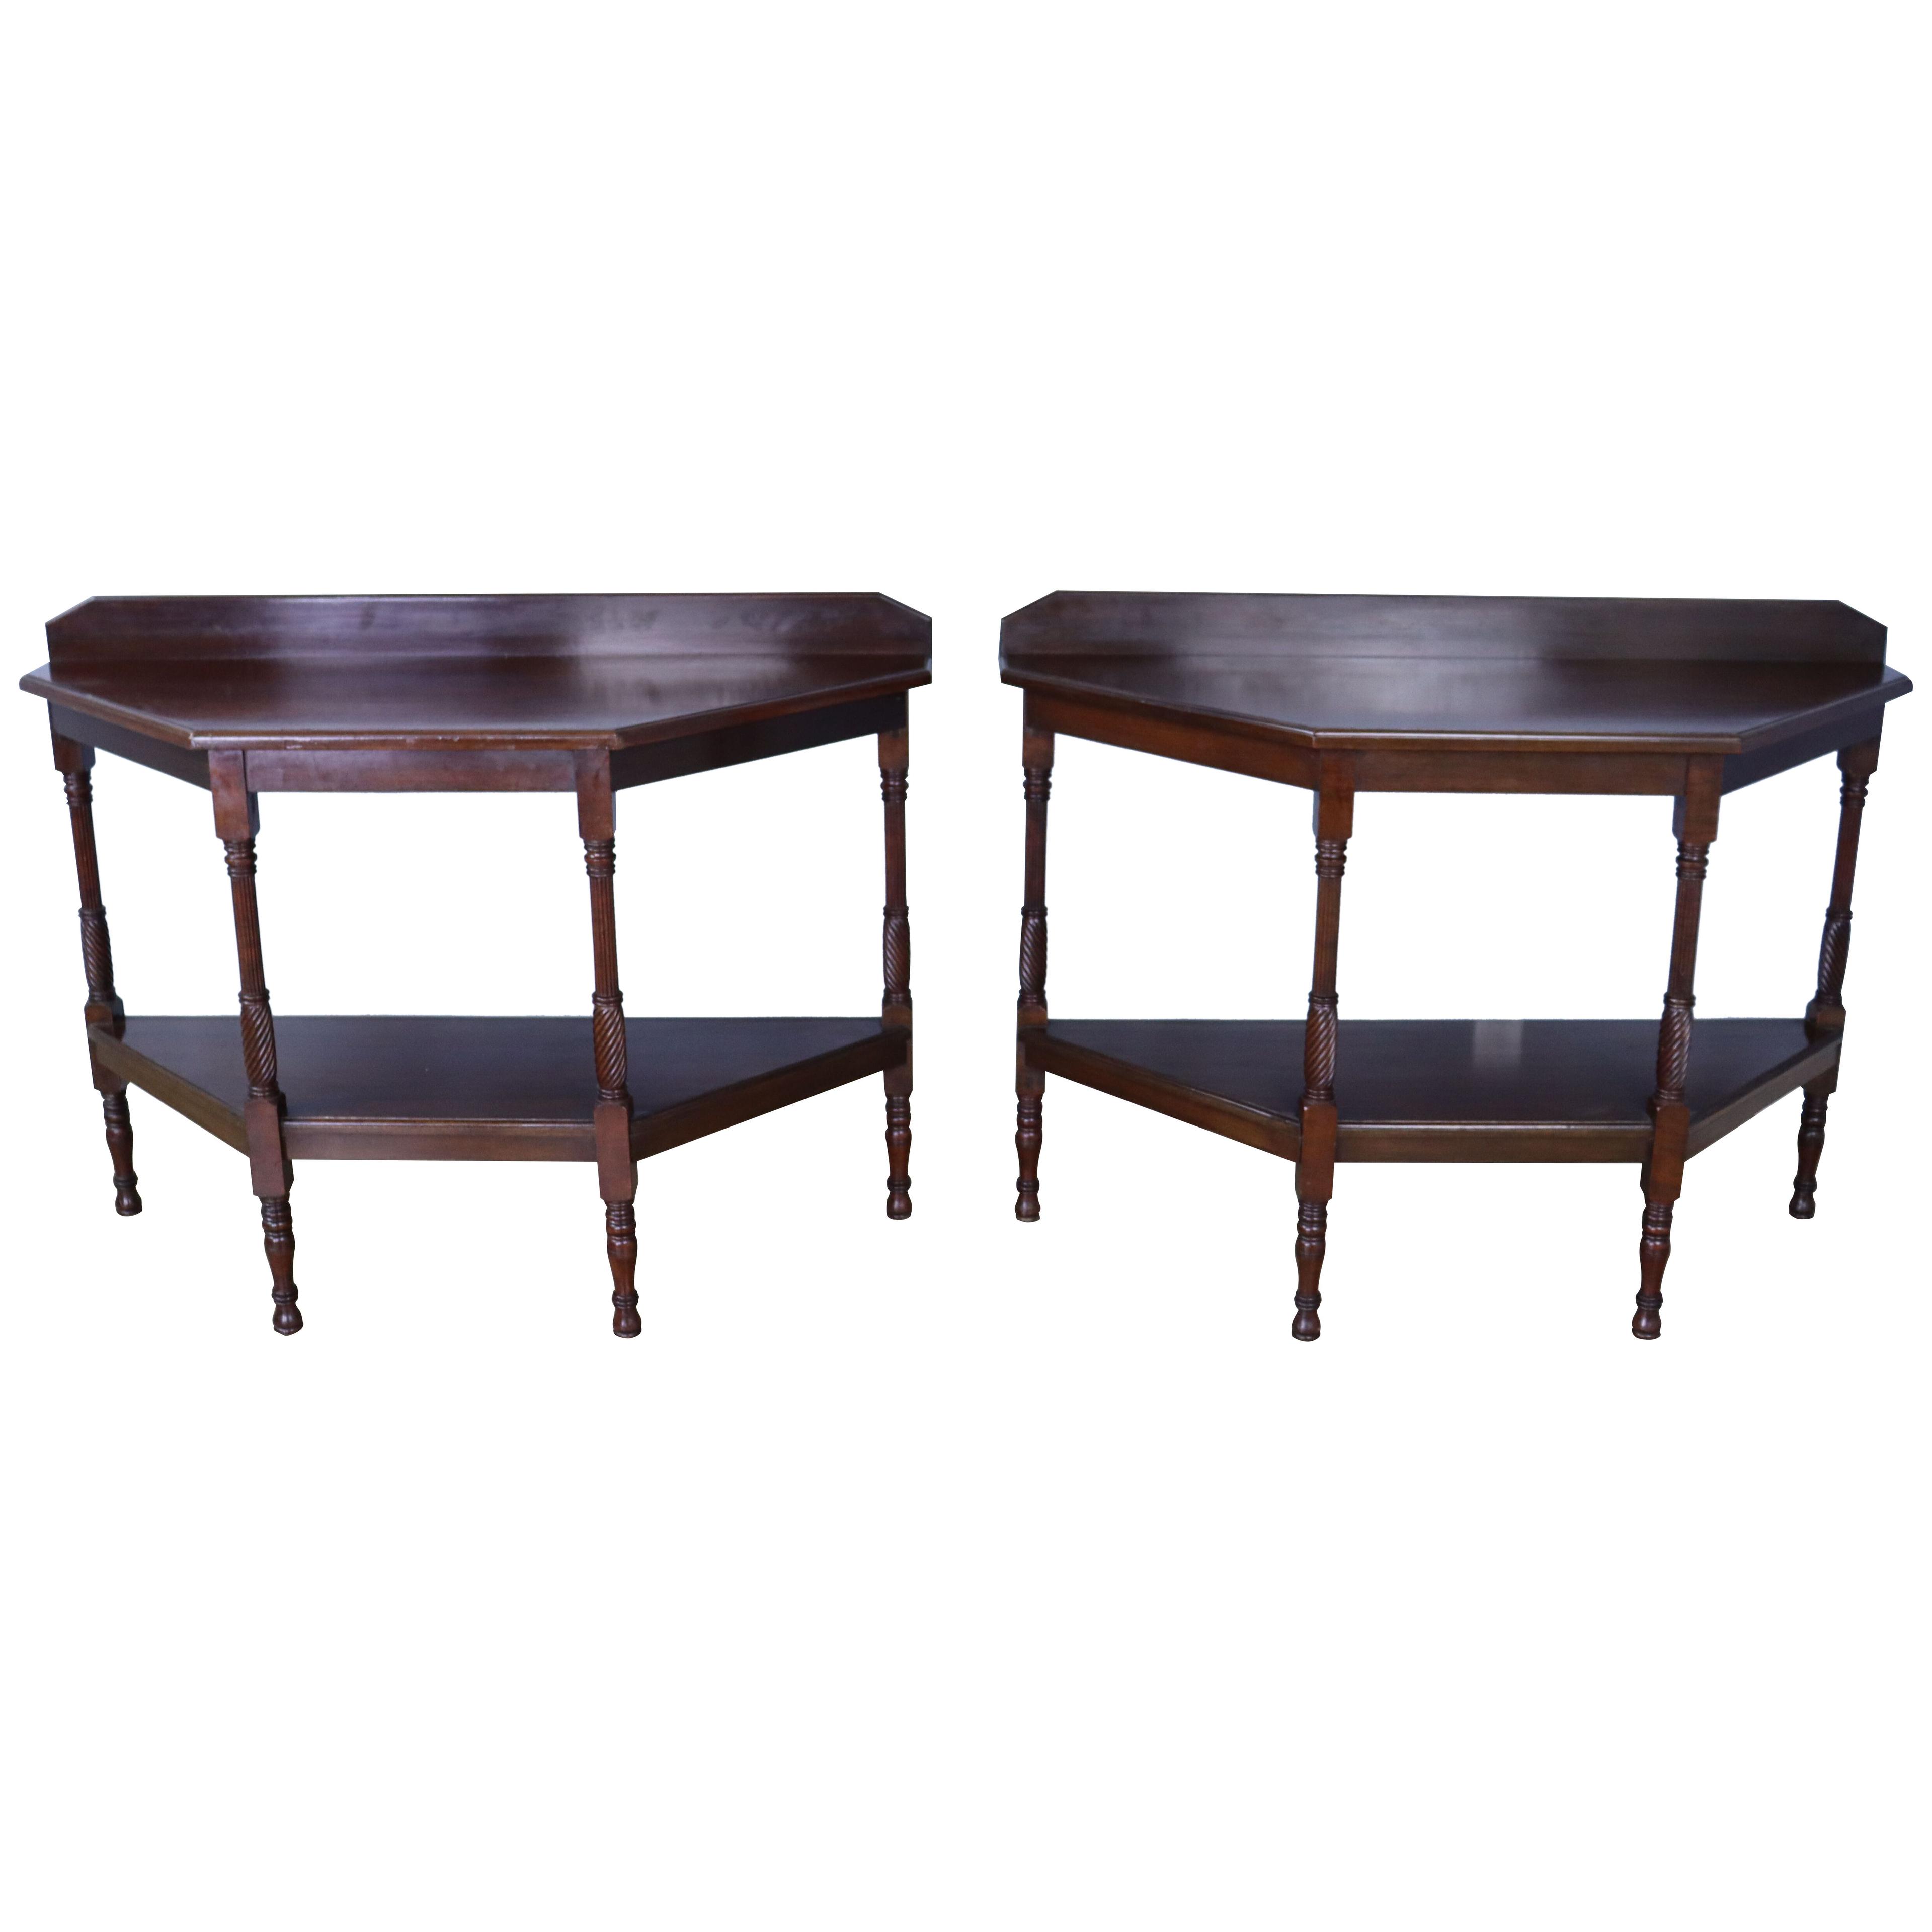 Pair of Antique English Mahogany Console Tables